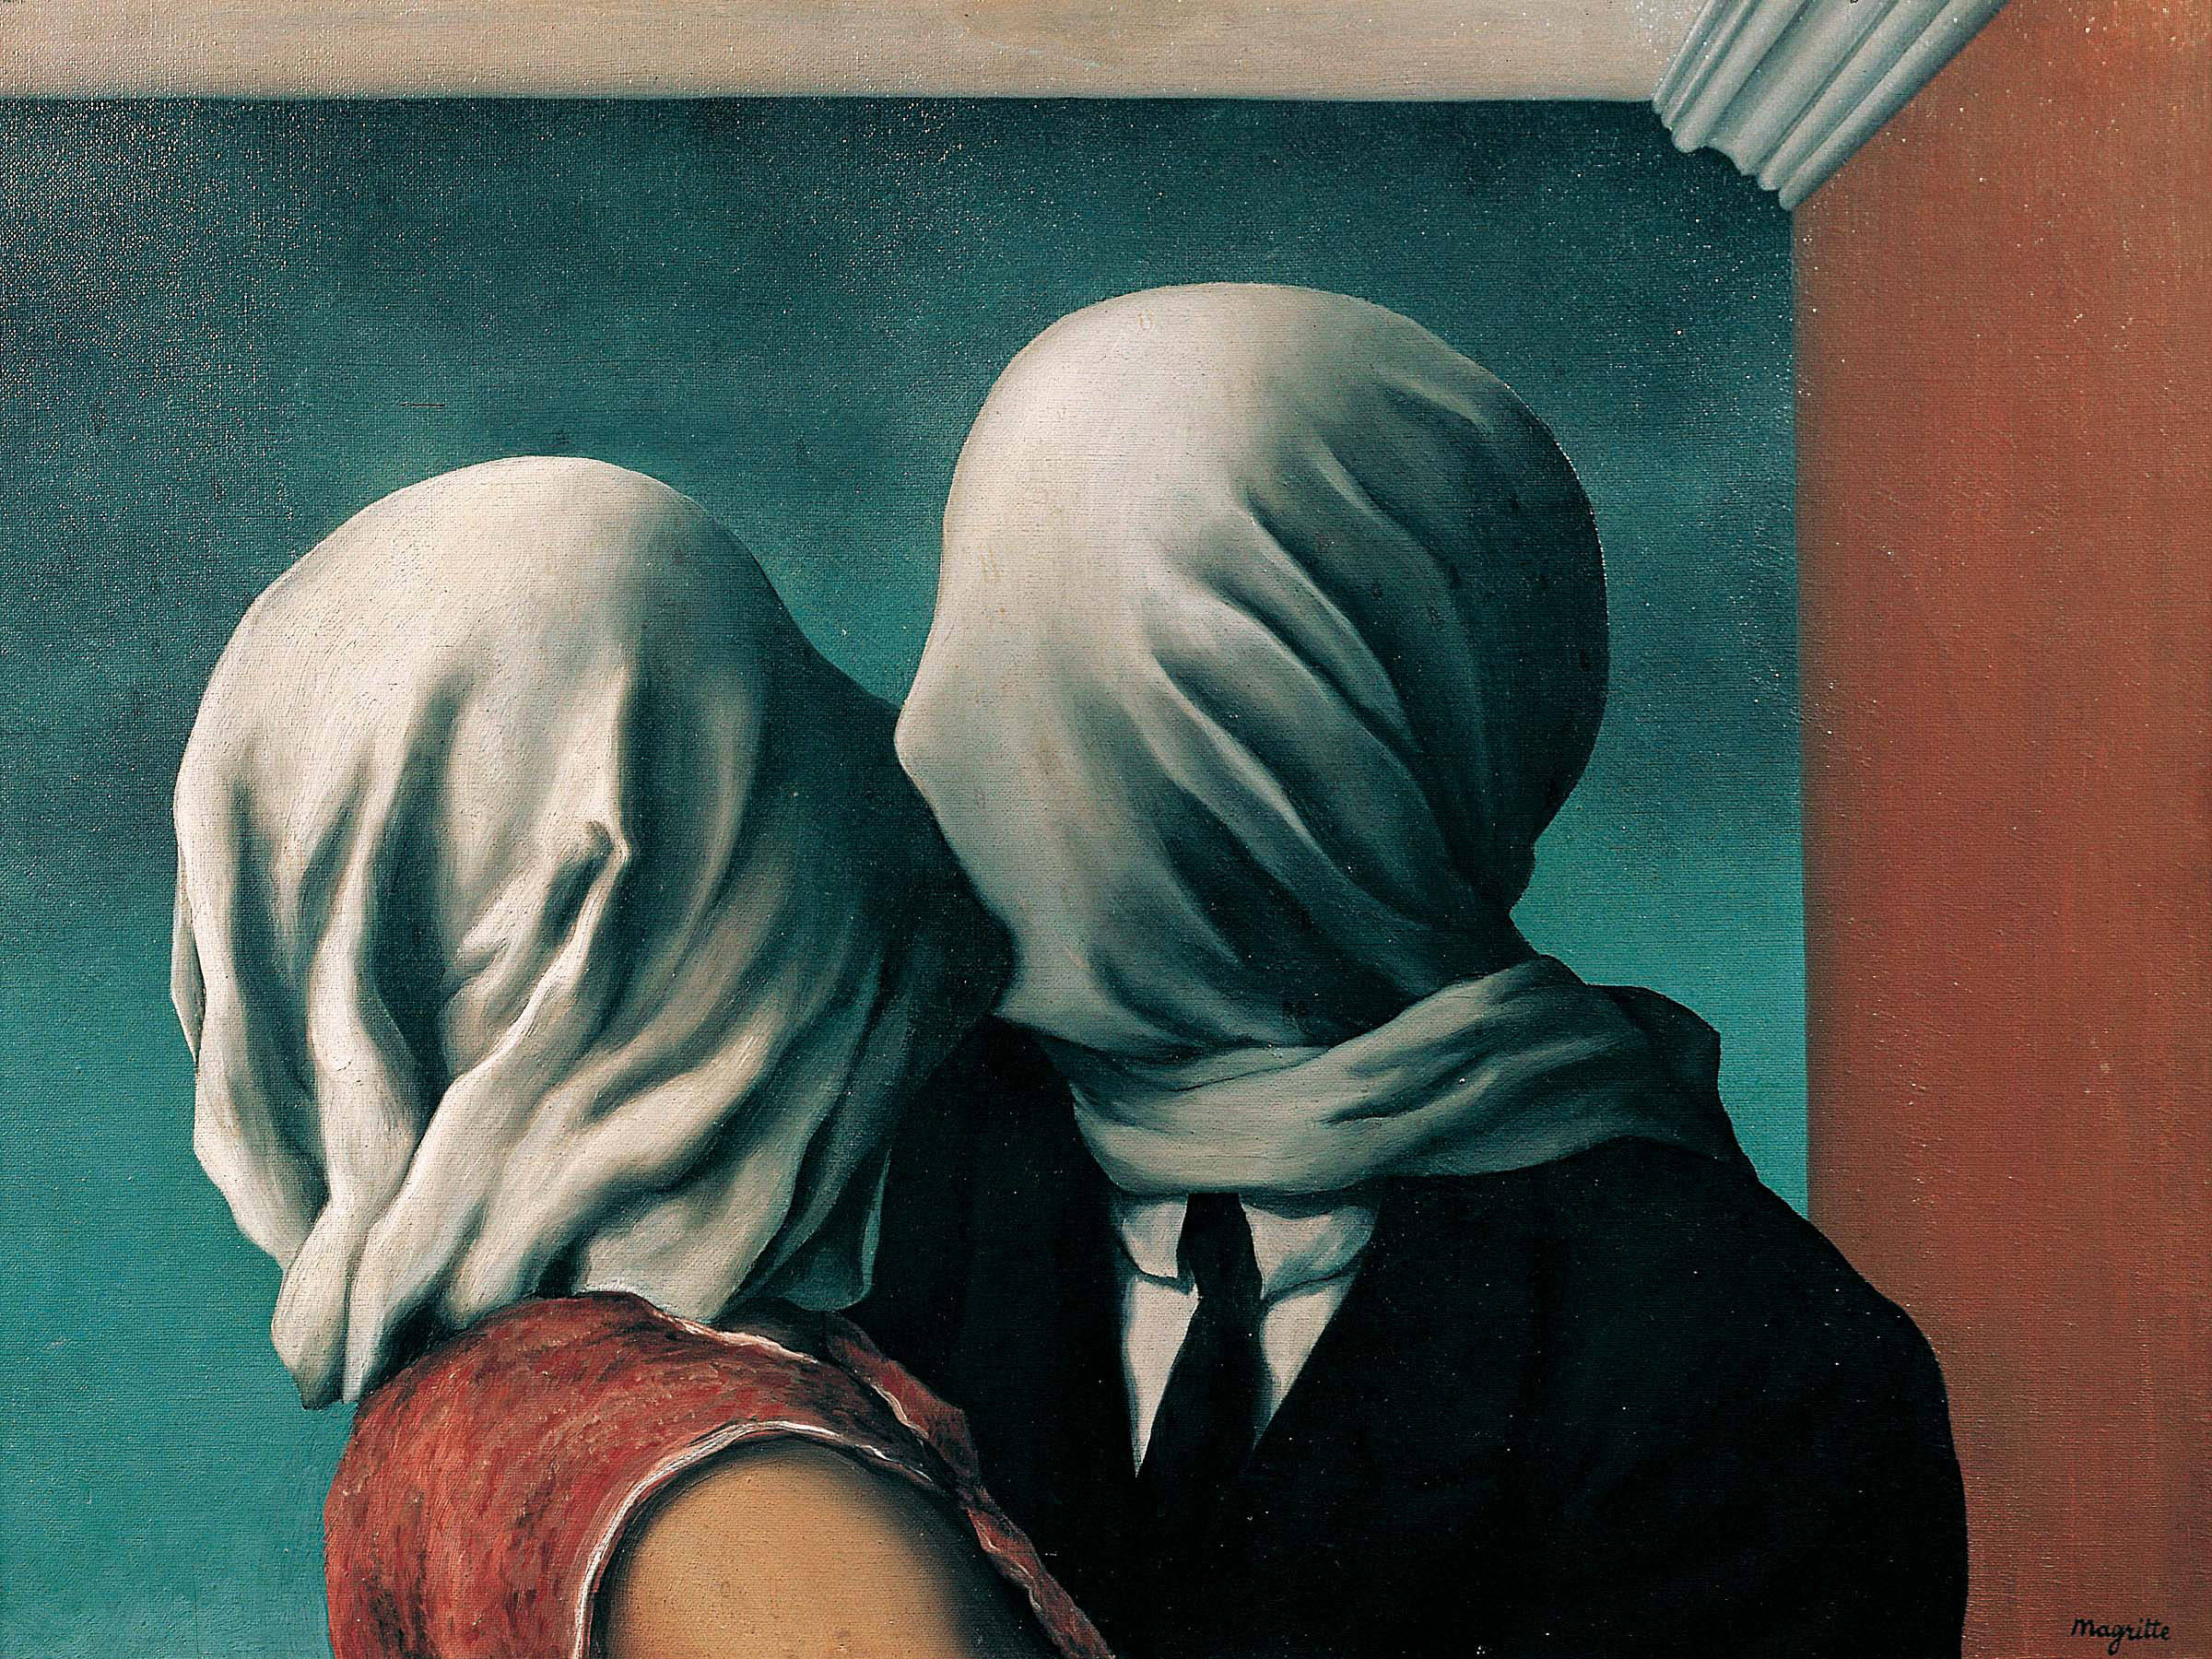 Rene-Magritte-The-Lovers-1928